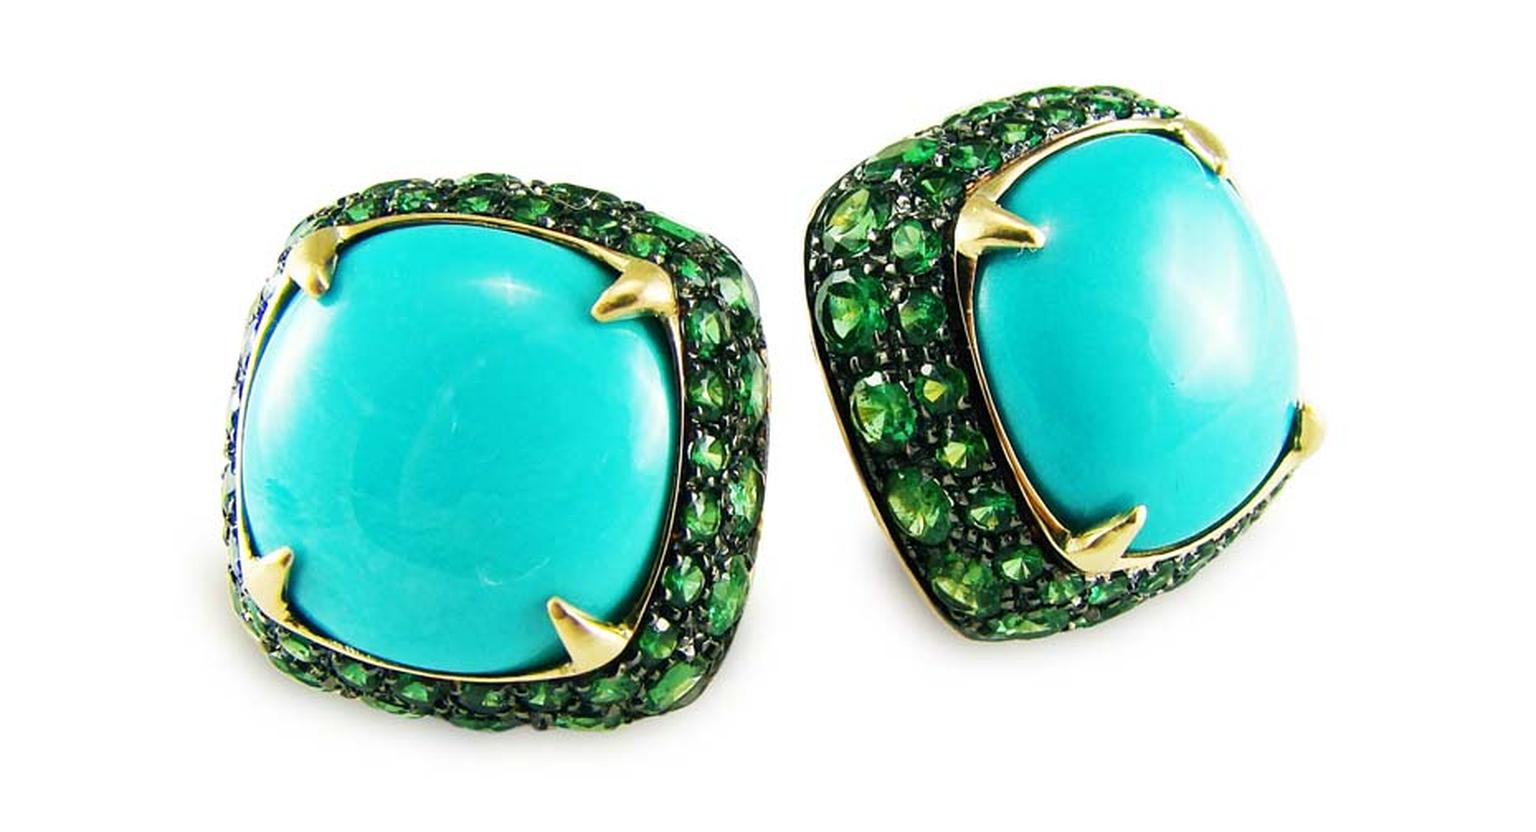 Inspired by the azure sea, Corrado Giuspino’s earrings feature tsavorites surrounding a central turquoise stone.